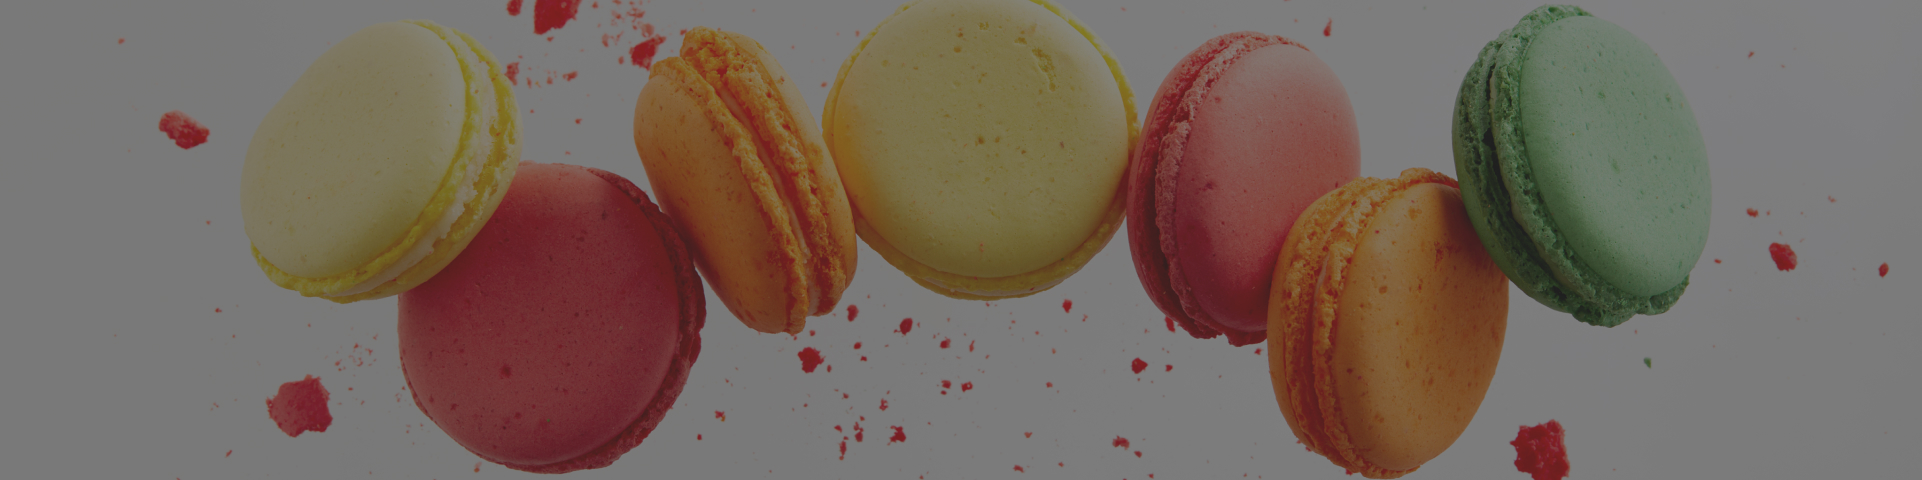 1С-Rarus system helps Ladurée preserve the French quality of desserts